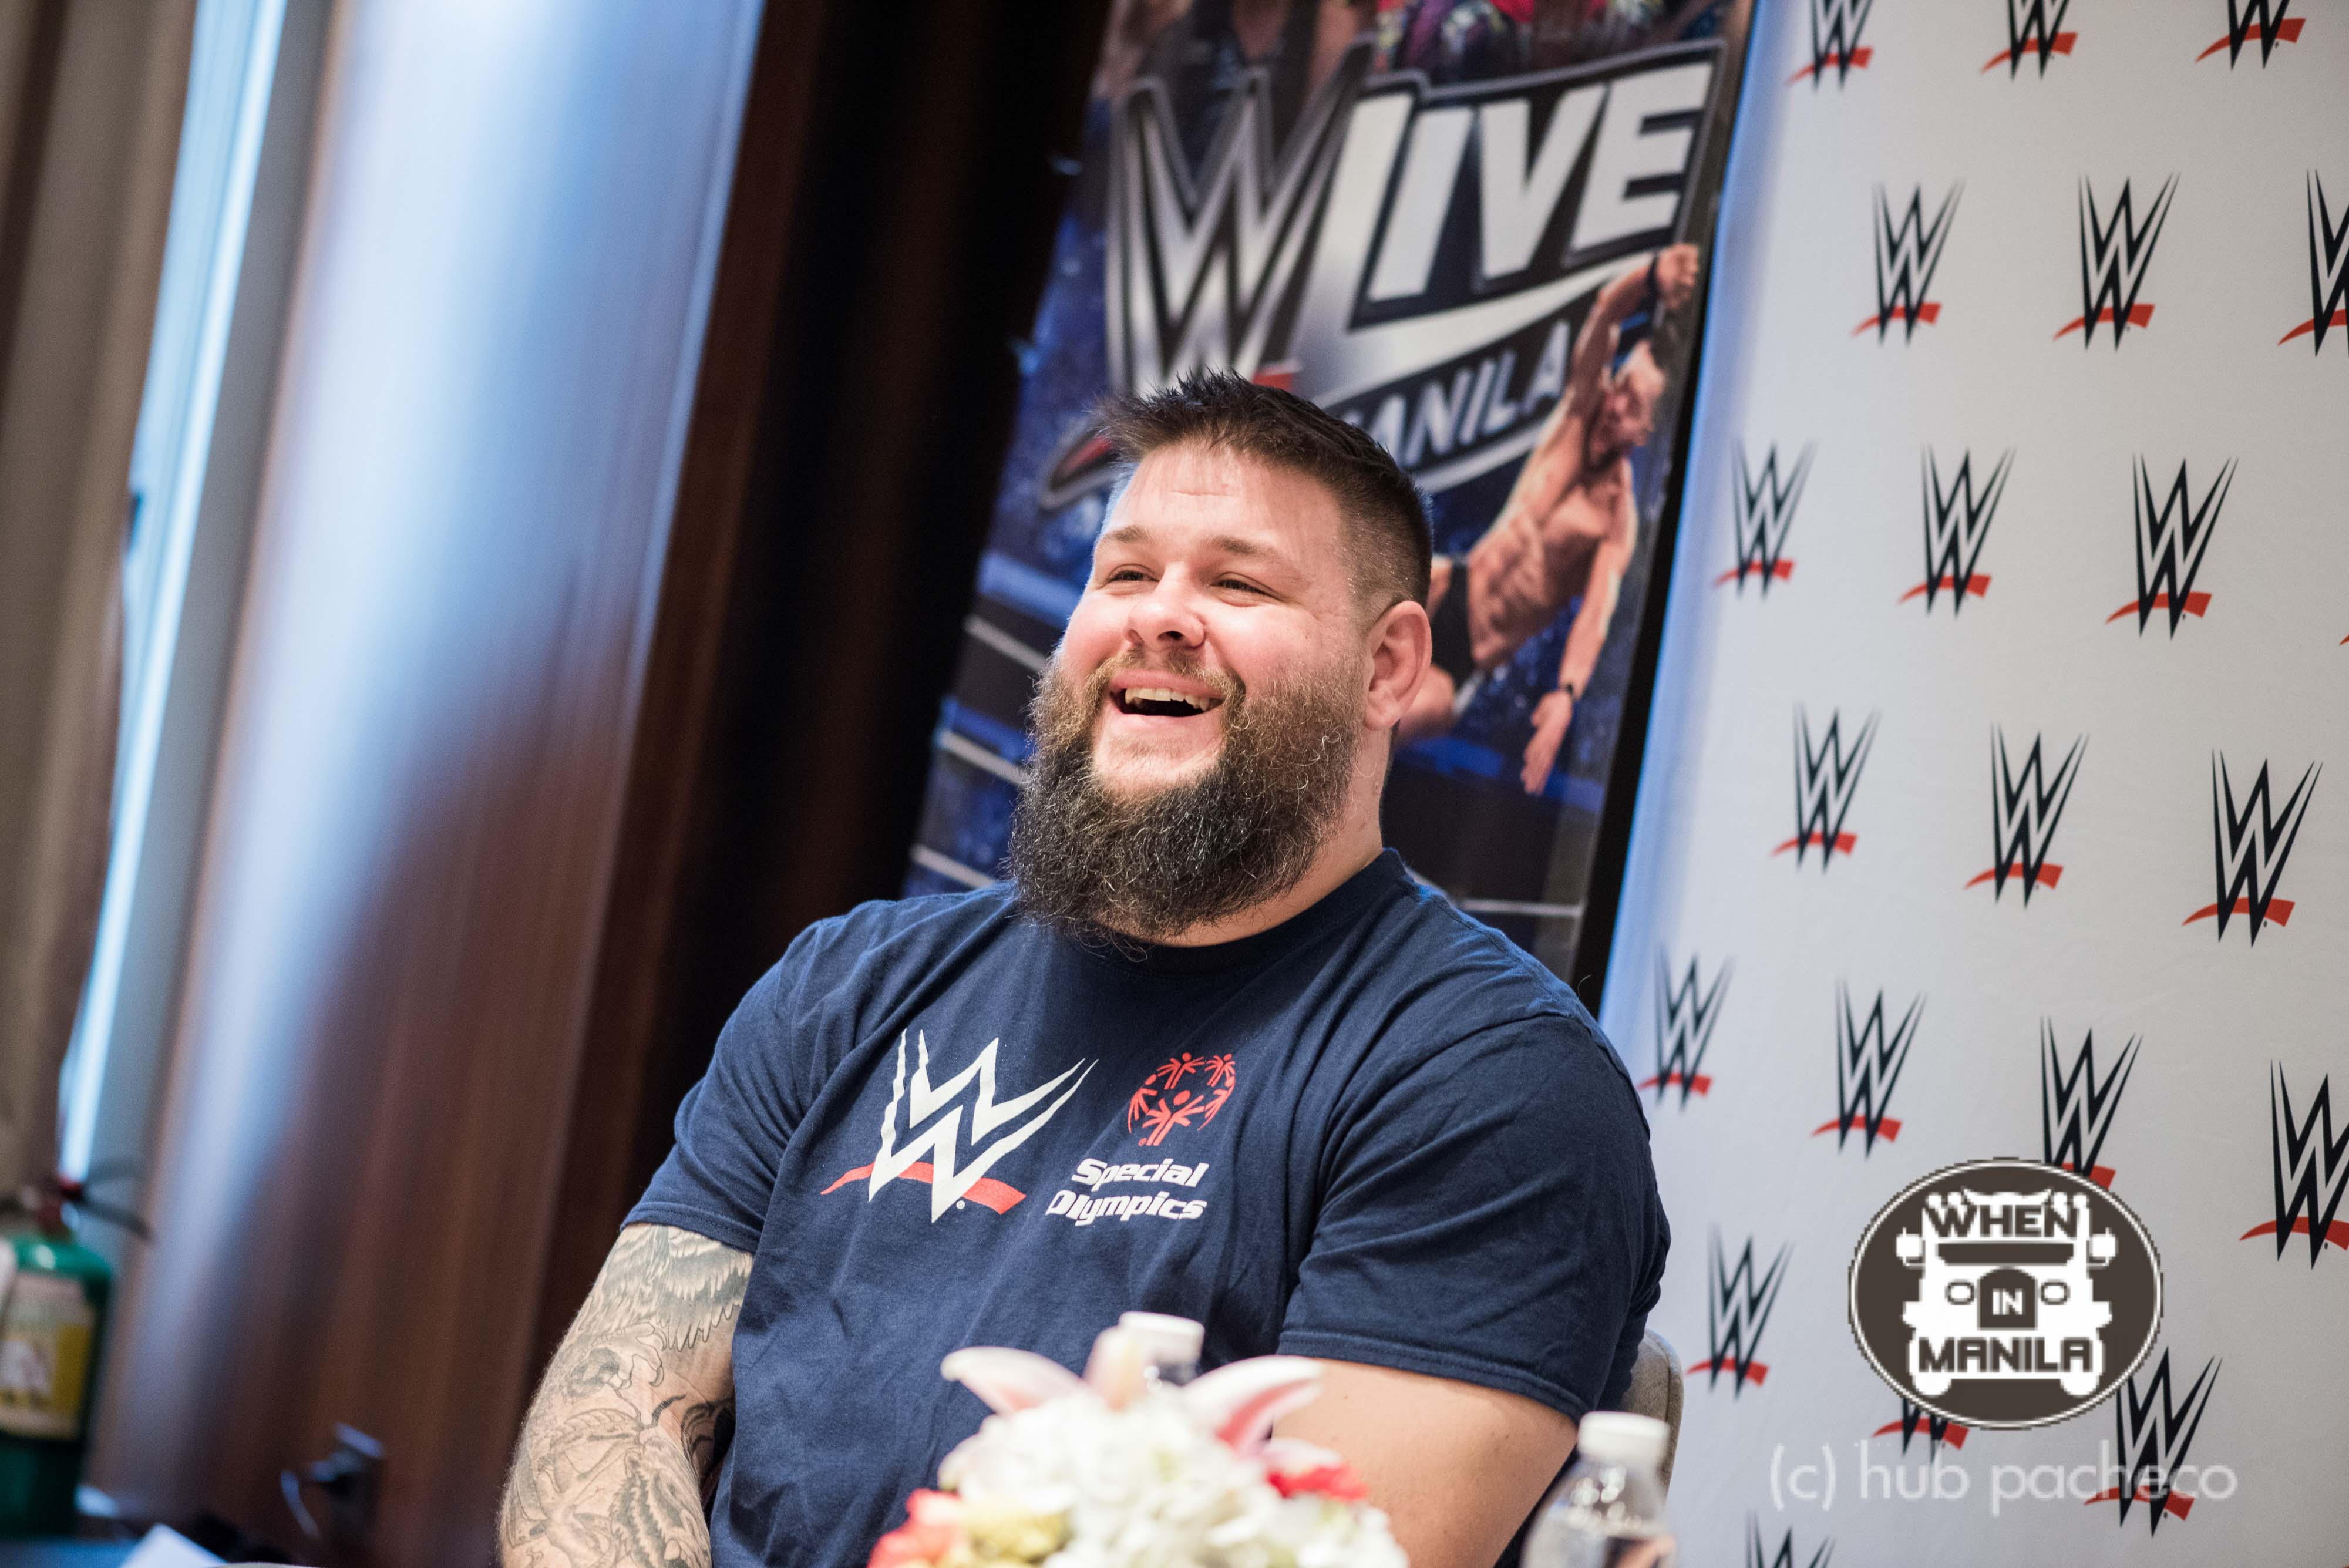 WWE Superstars Kevin Owens and Ali on When in Manila Kevin Owens2